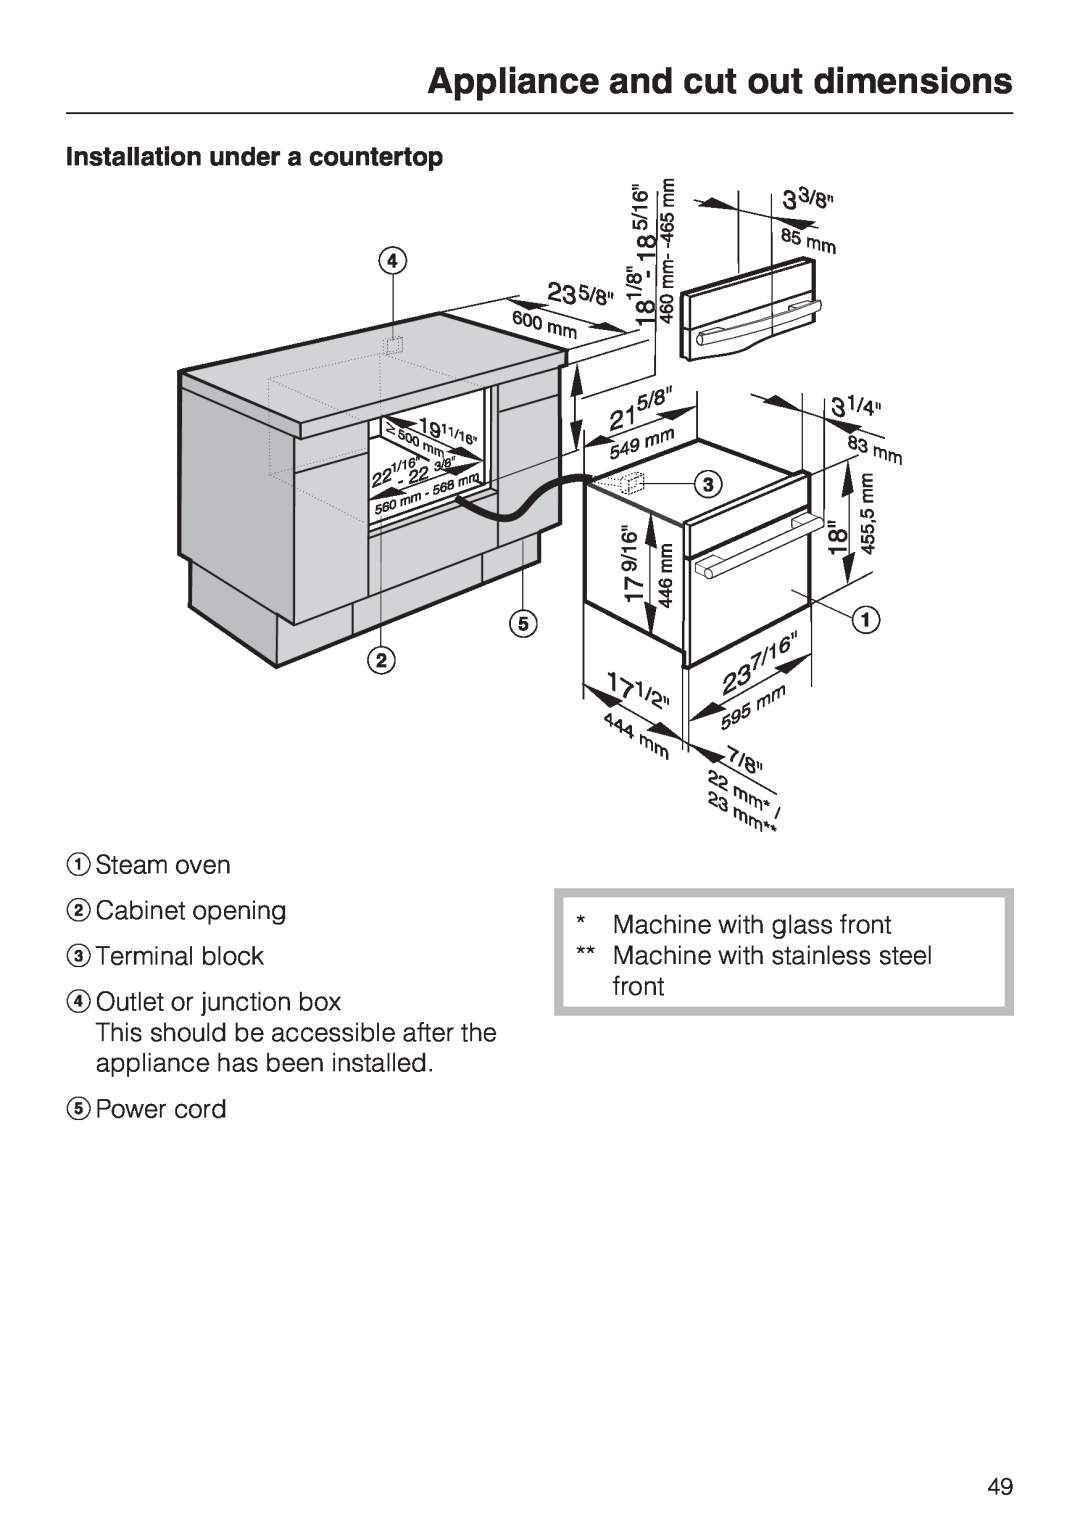 Miele DG 4088, DG4082 installation instructions Appliance and cut out dimensions, Installation under a countertop 